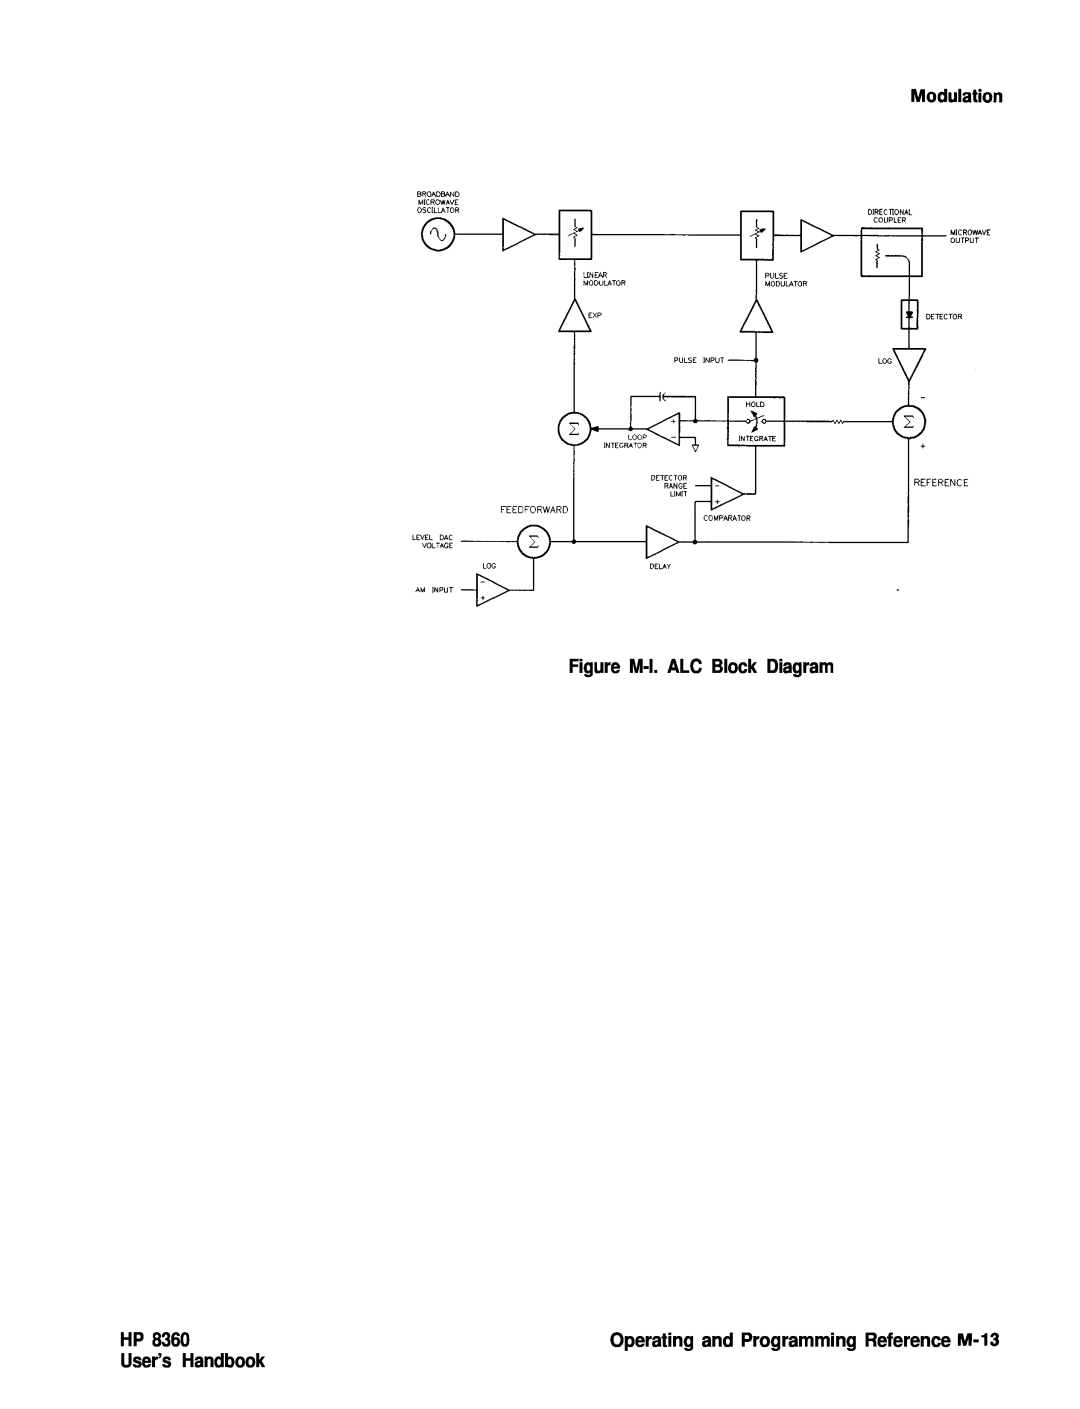 HP 24A, 83620A, 22A Figure M-l. ALC Block Diagram, User’s Handbook, Operating and Programming Reference M-13, Feedforward 